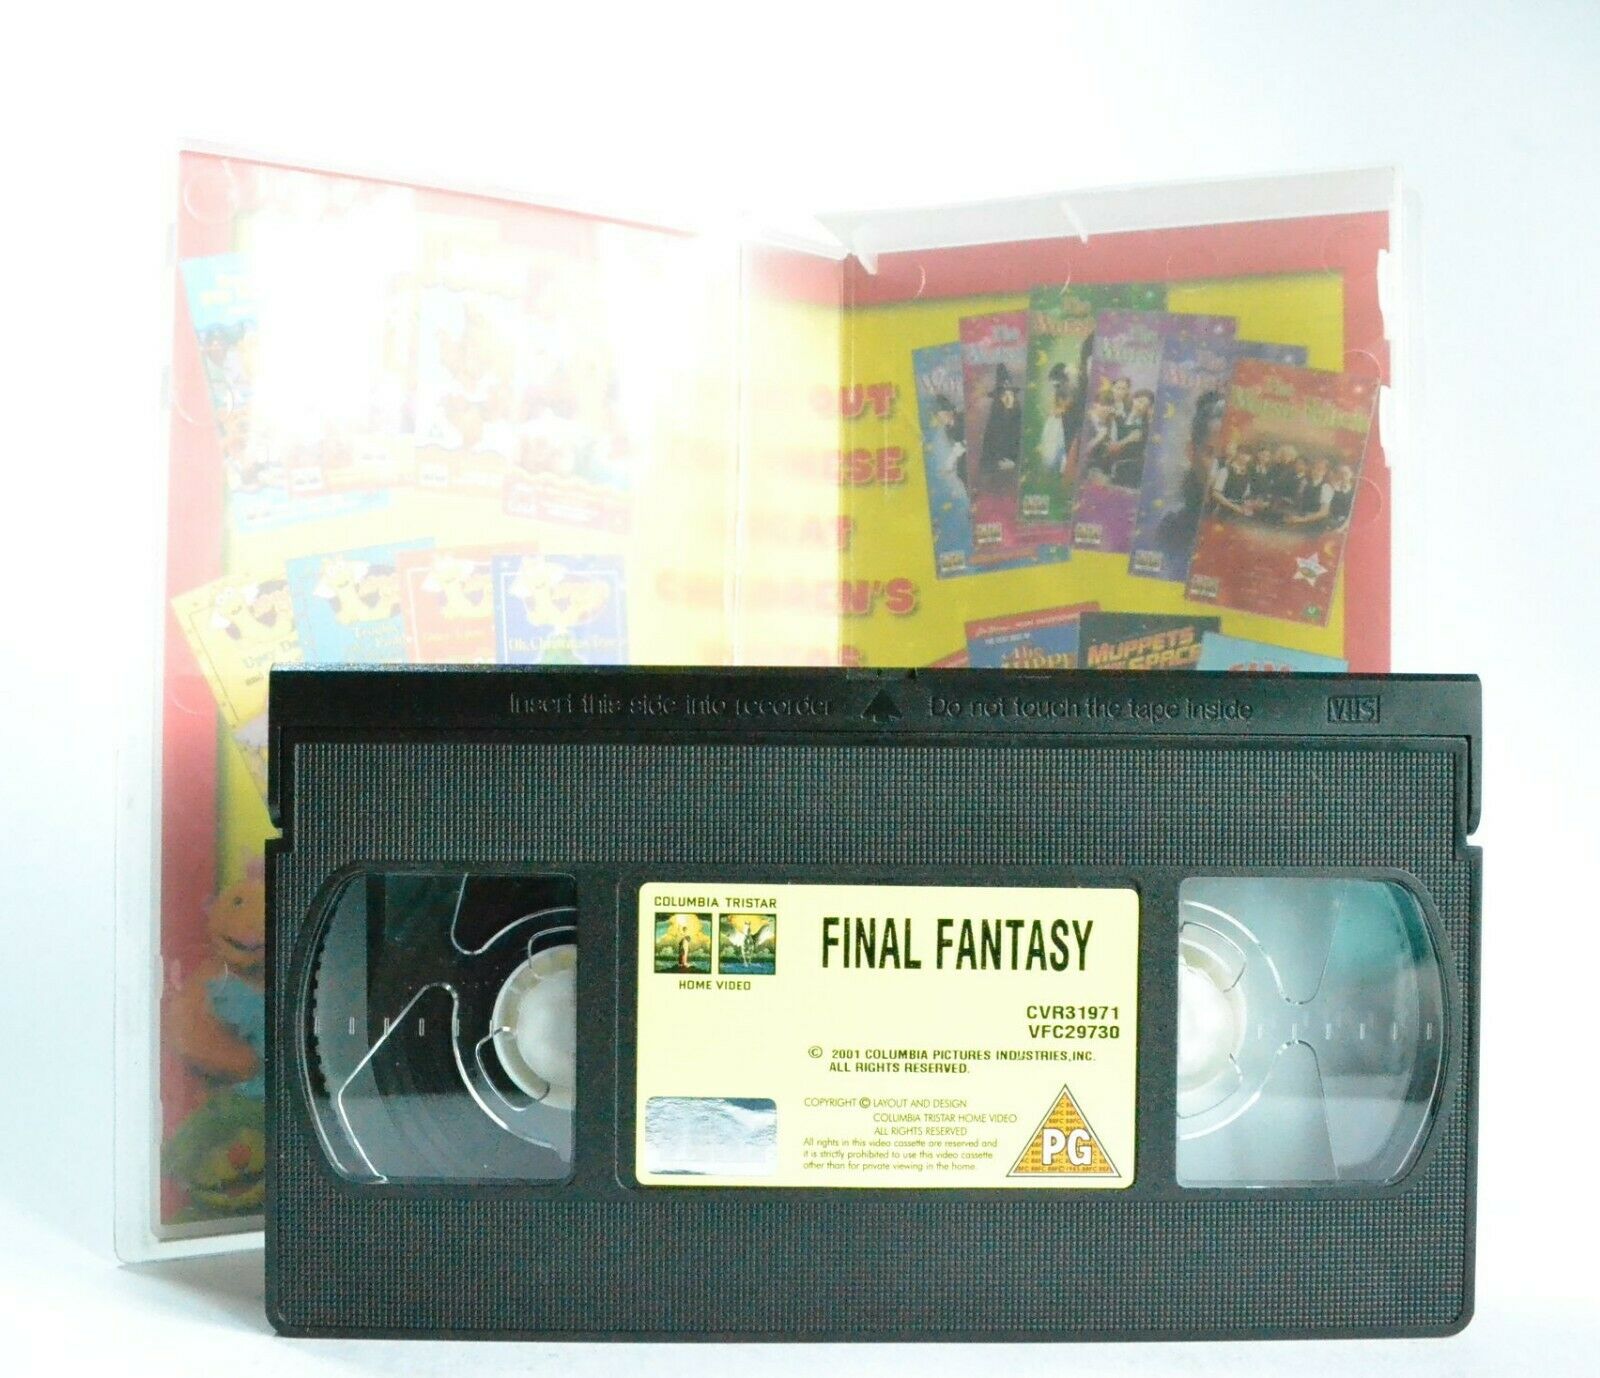 Final Fantasy: The Spirit Within - Columbia (2001) - Animated Sci-Fi - Pal VHS-